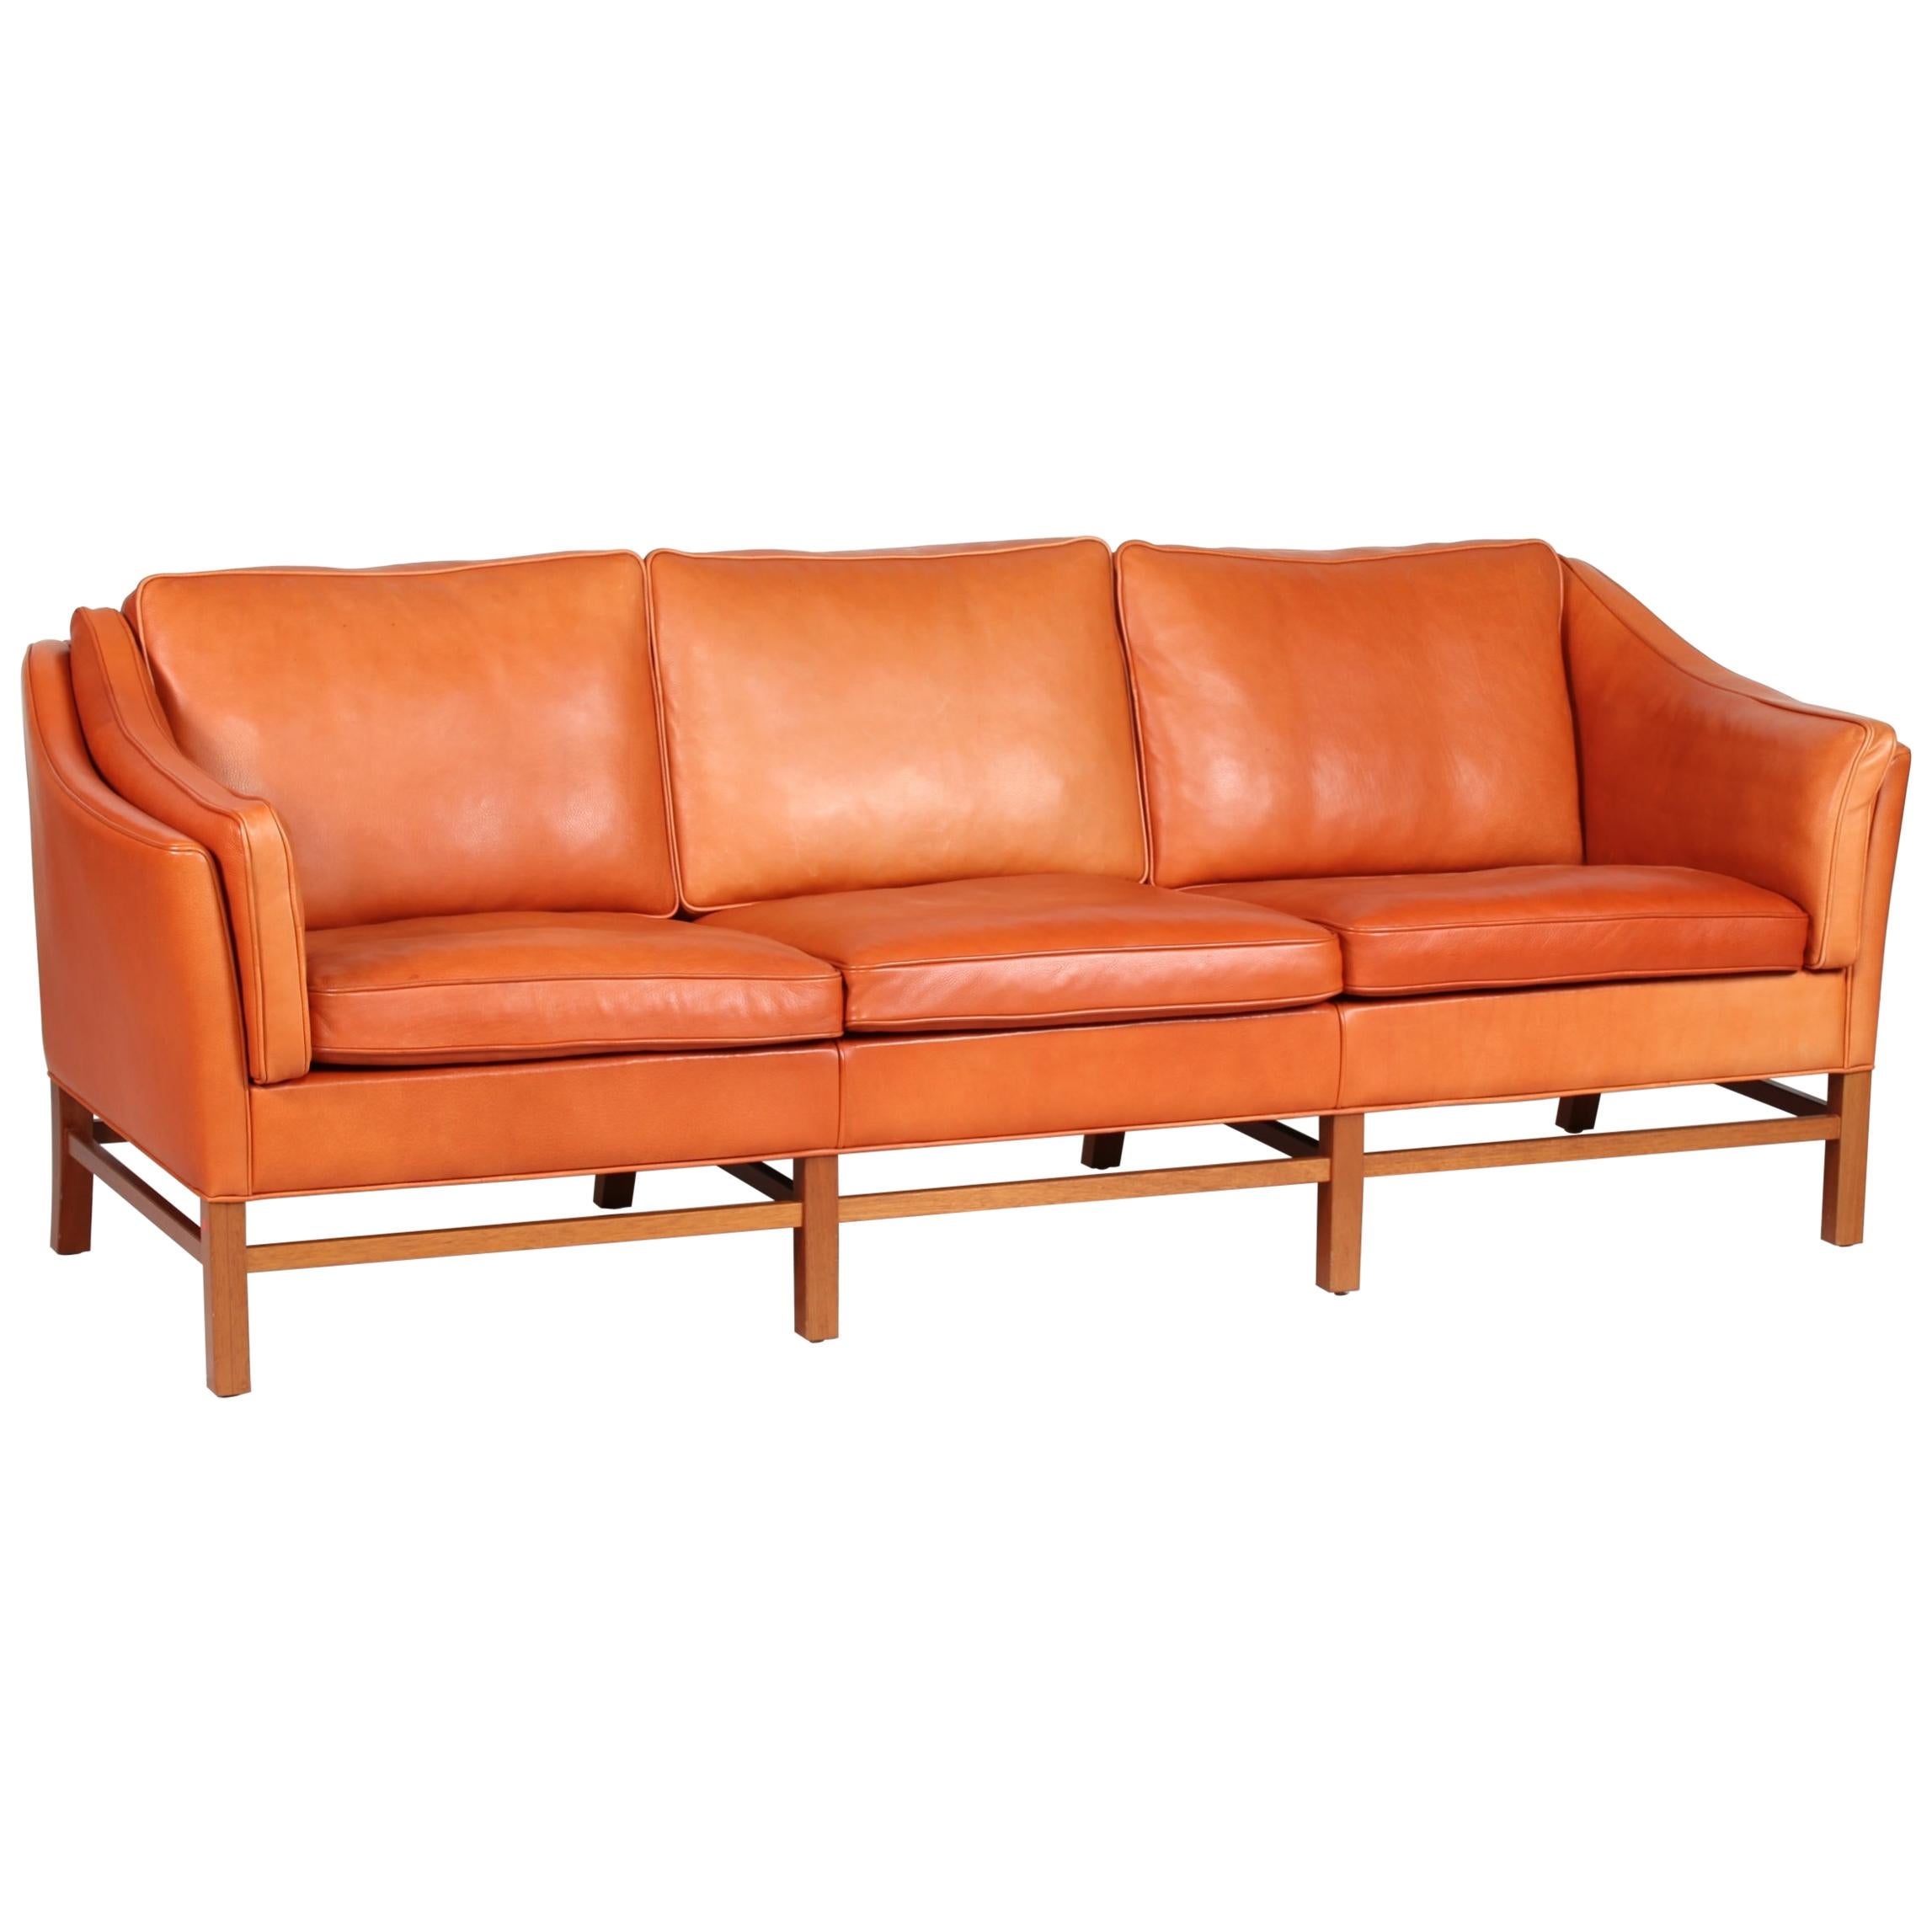 Danish Modern 3-Seat Sofa by Grant Furniture with Cognac-Colored Leather 1980s